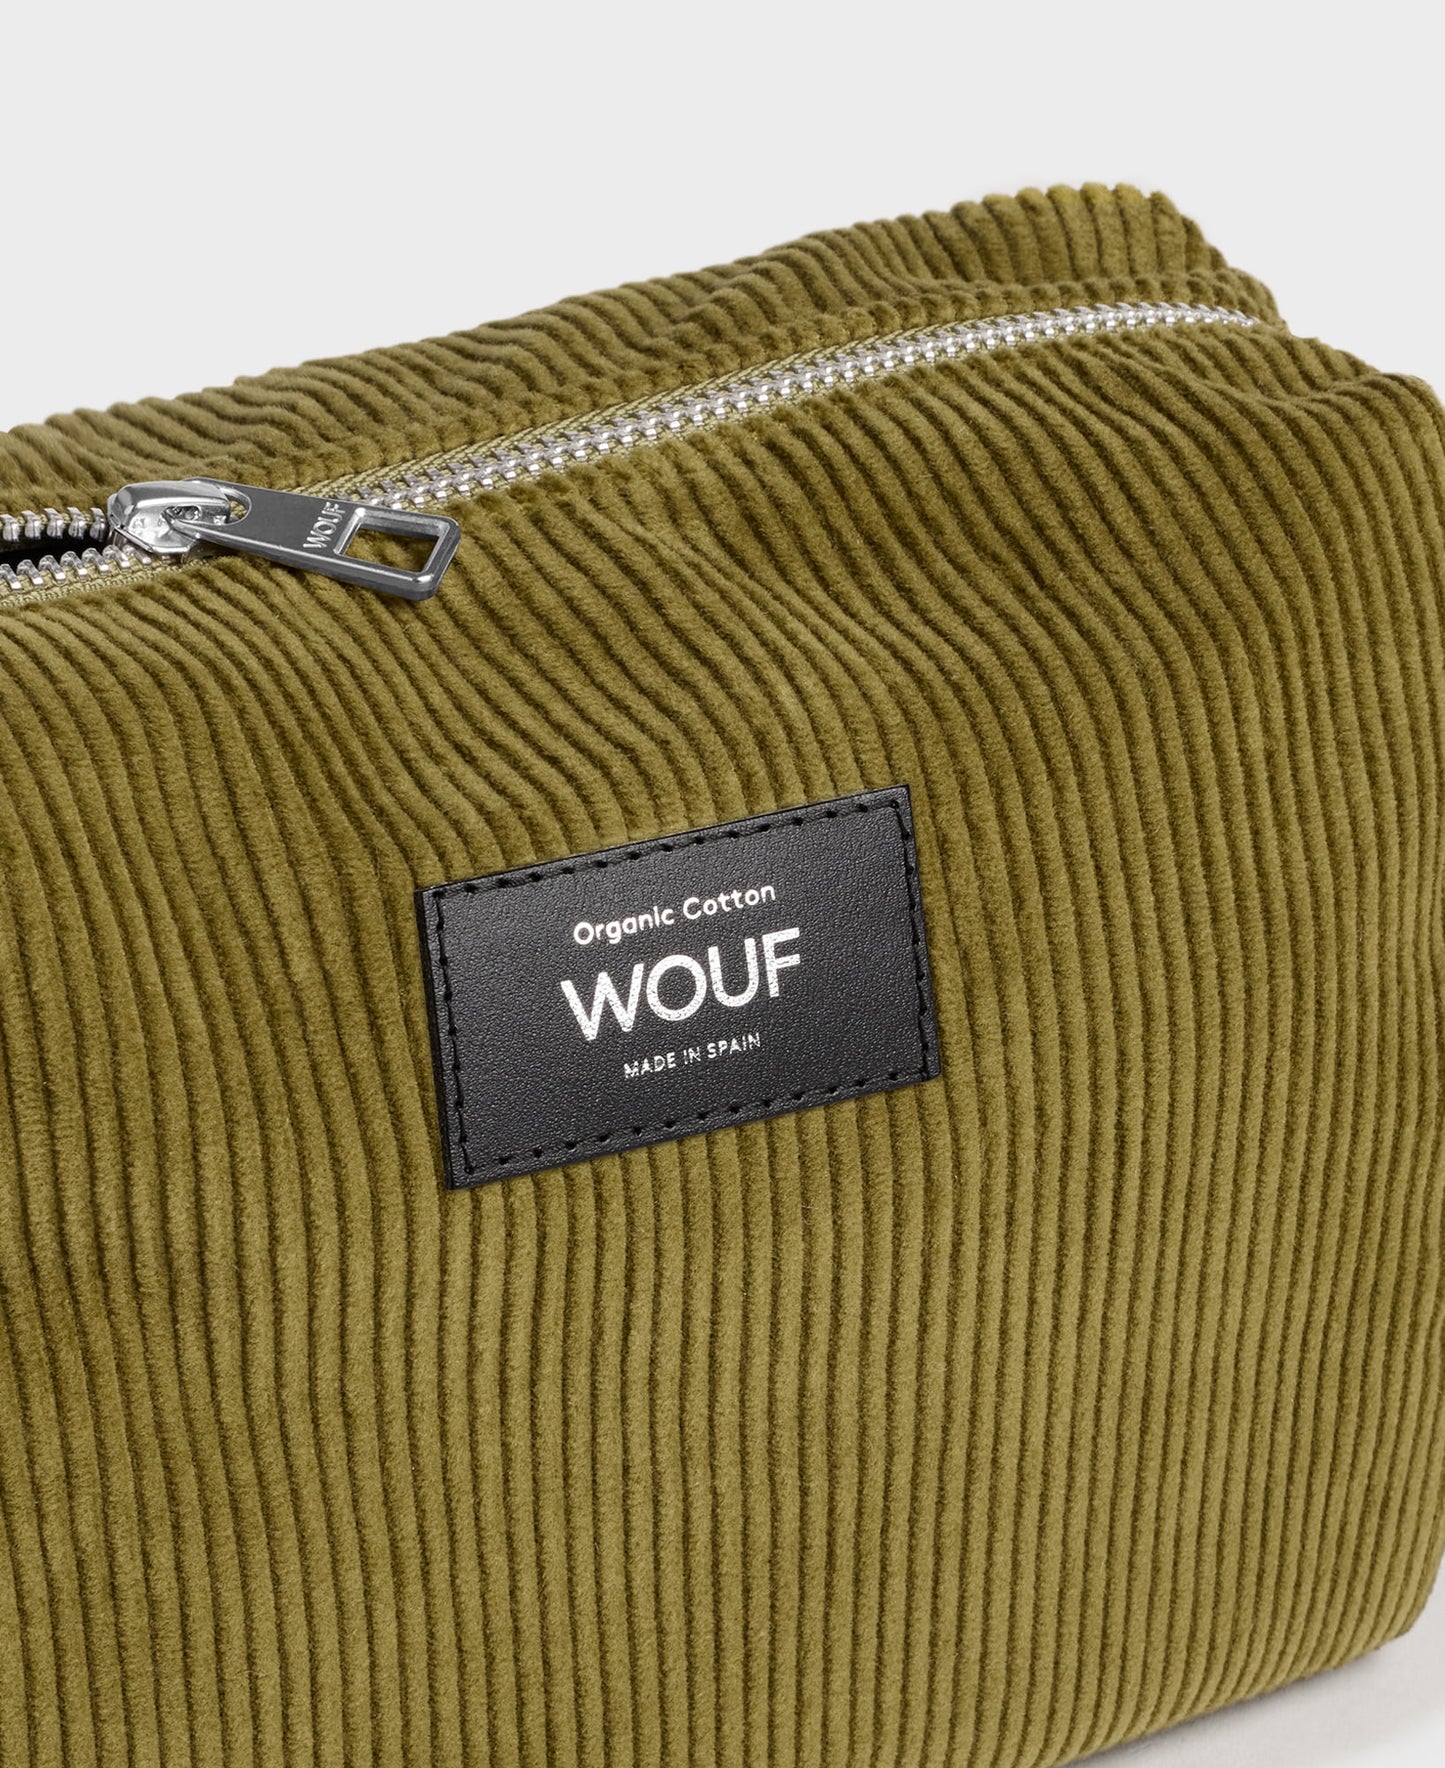 Olive Toiletry Bag